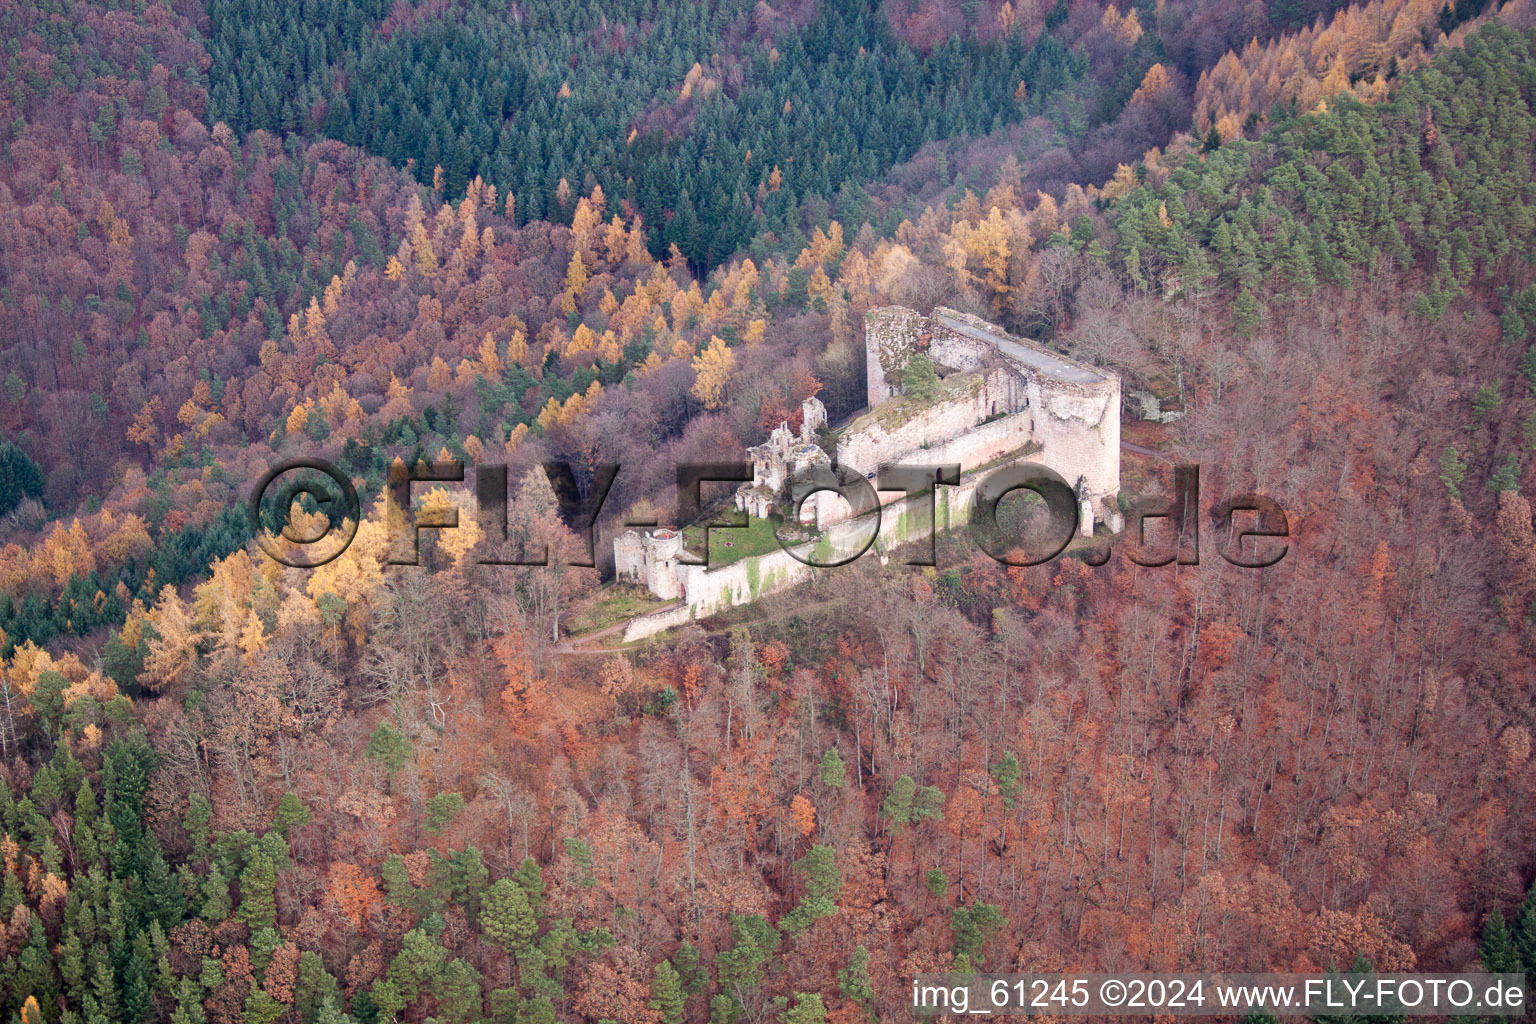 Ruins and vestiges of the former castle and fortress castle Neuscharfeneck in autumn - indian summer in Flemlingen in the state Rhineland-Palatinate